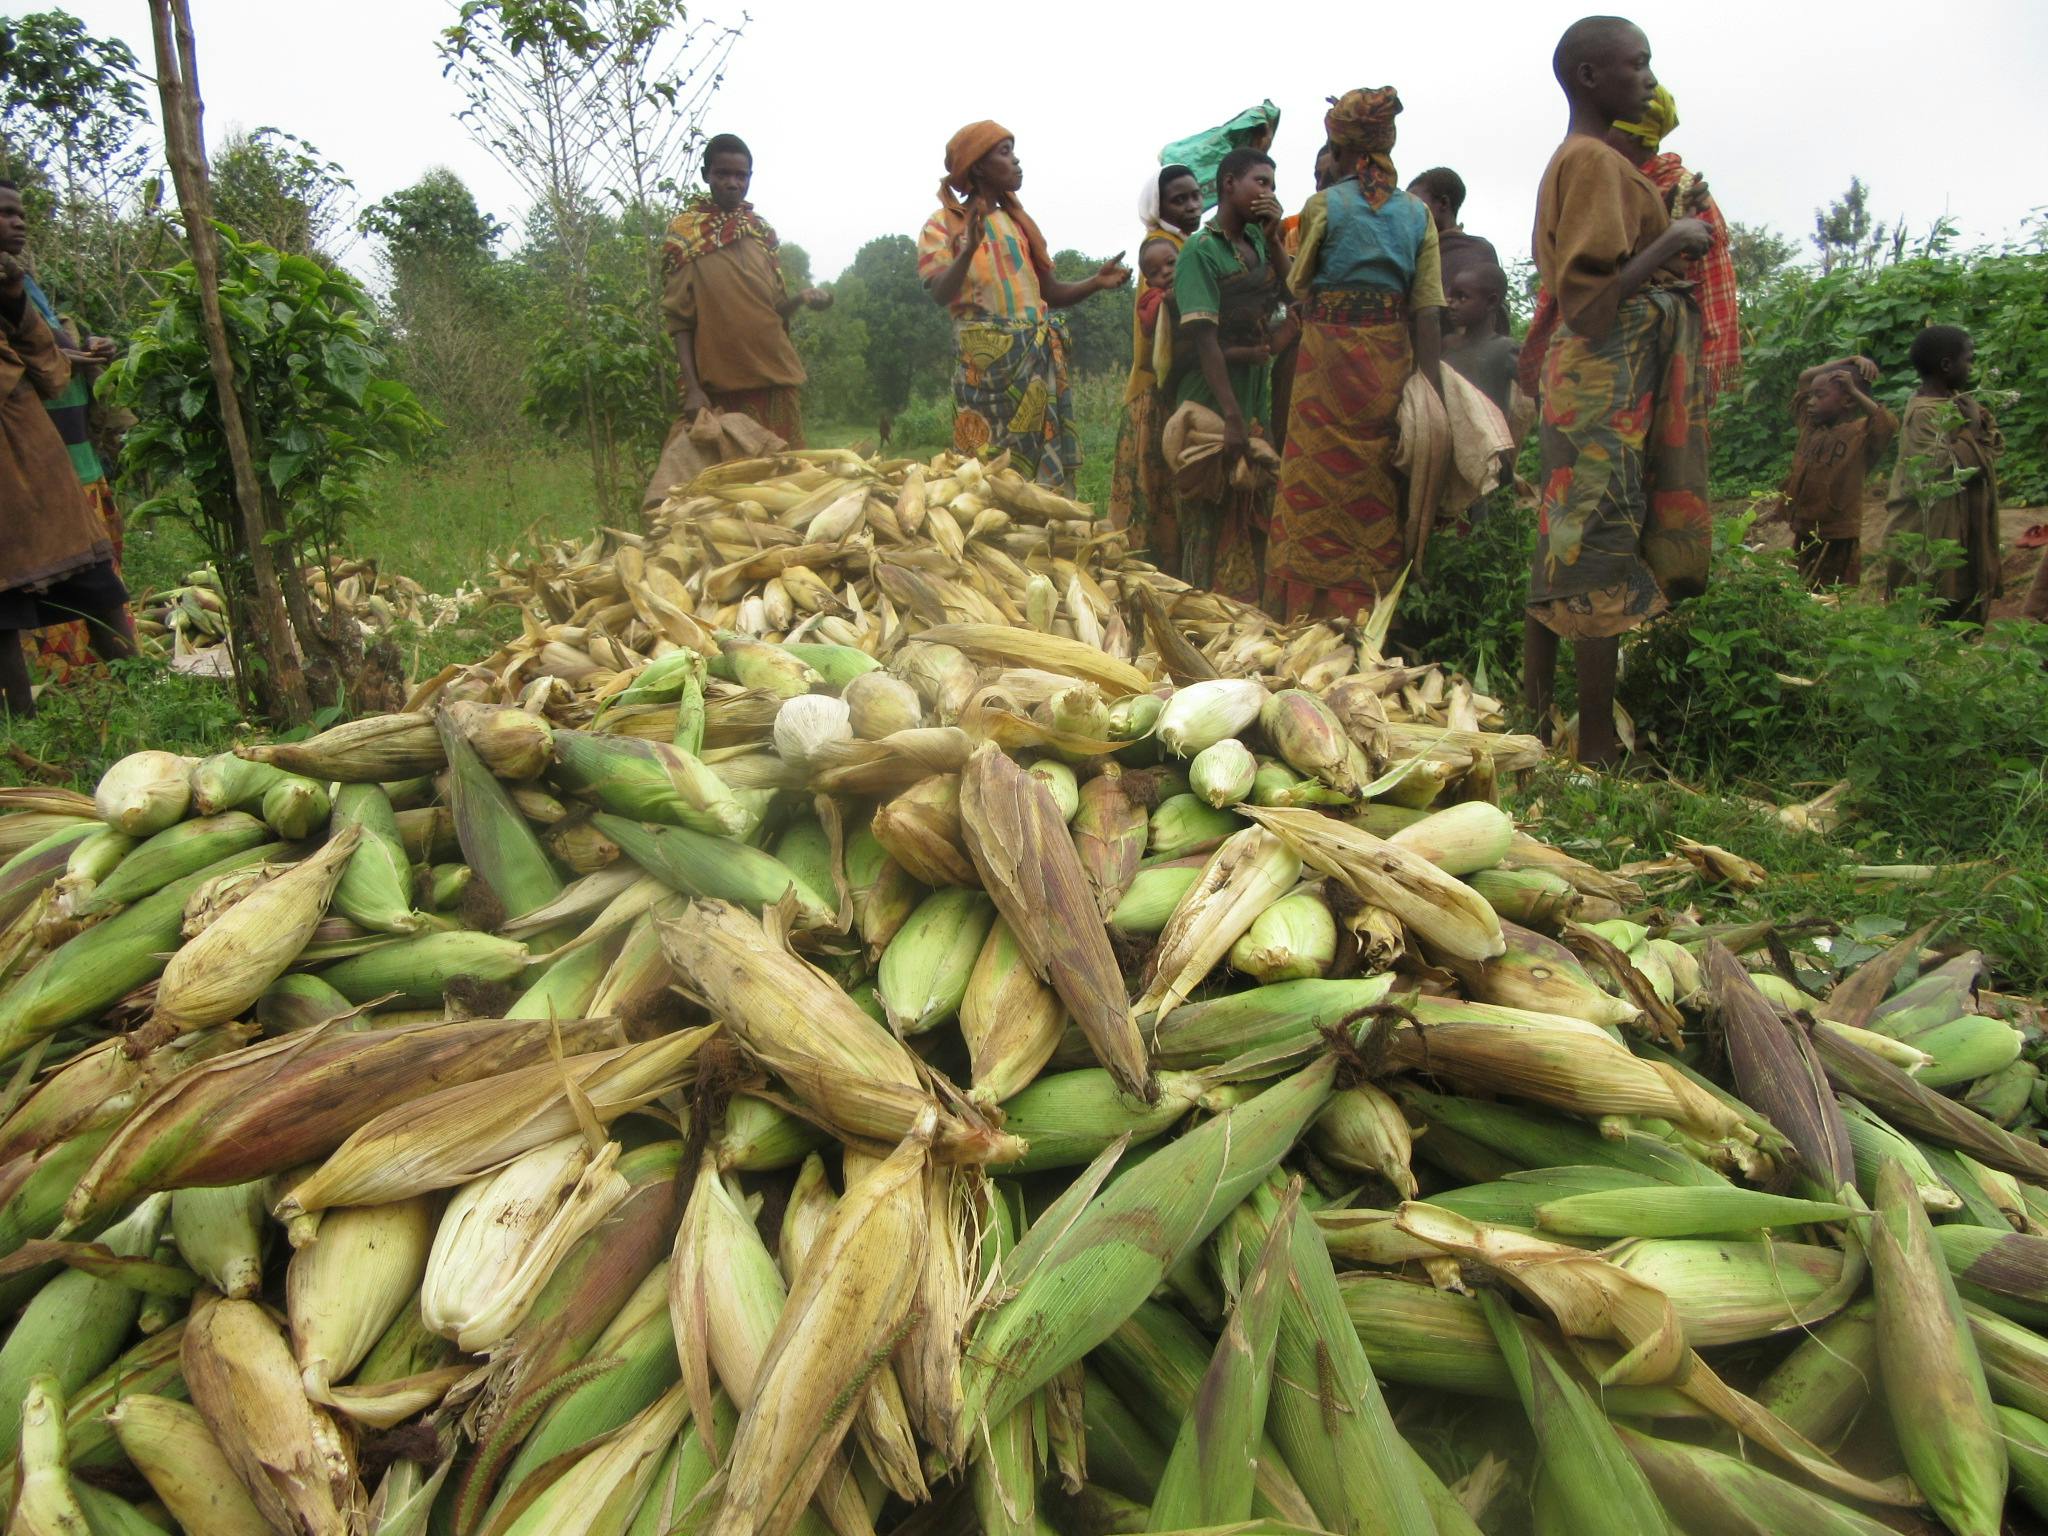 International Womens Day Photoessay - Burundi community members stands over large harvest of corn in a lush green field